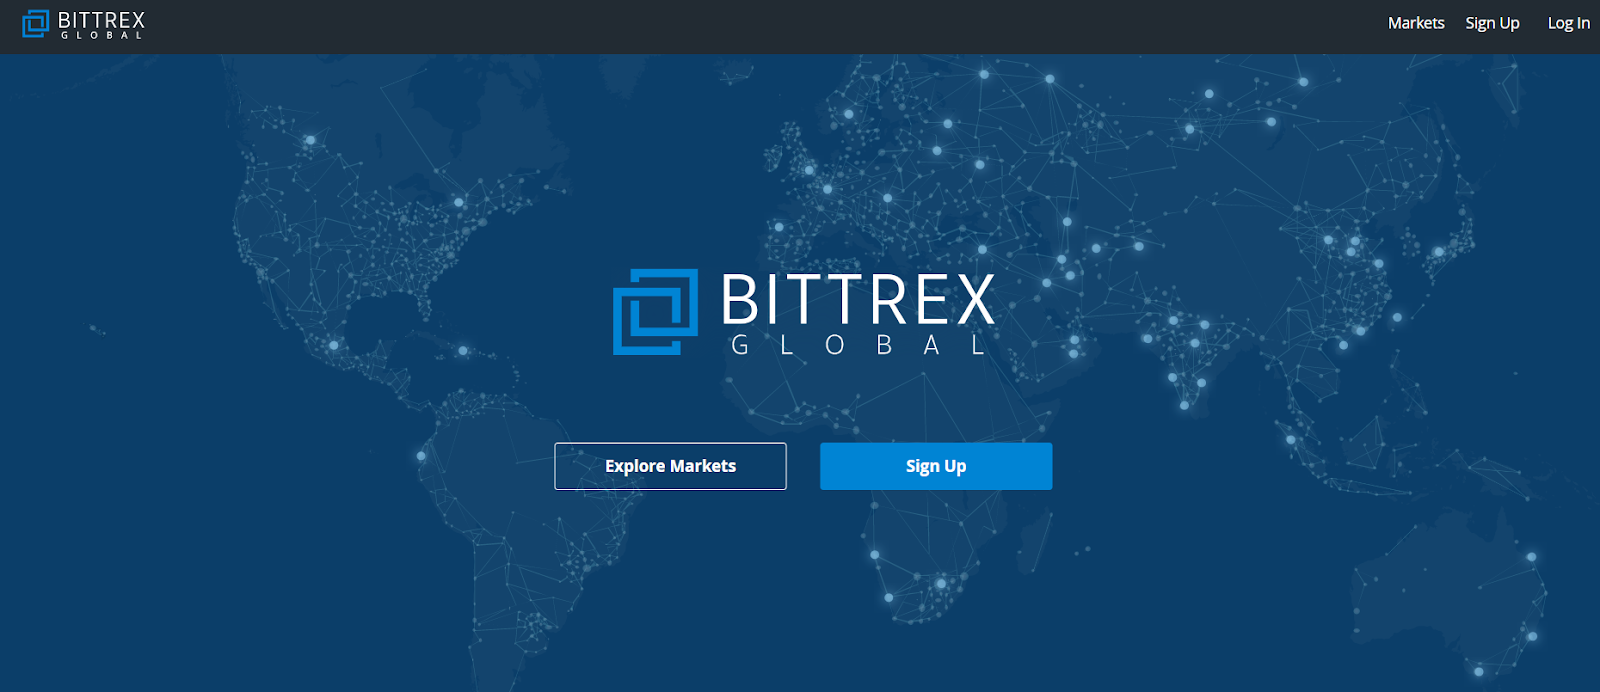 How to transfer Bitcoin Cash from Bittrex to Coinbase? – CoinCheckup Crypto Guides